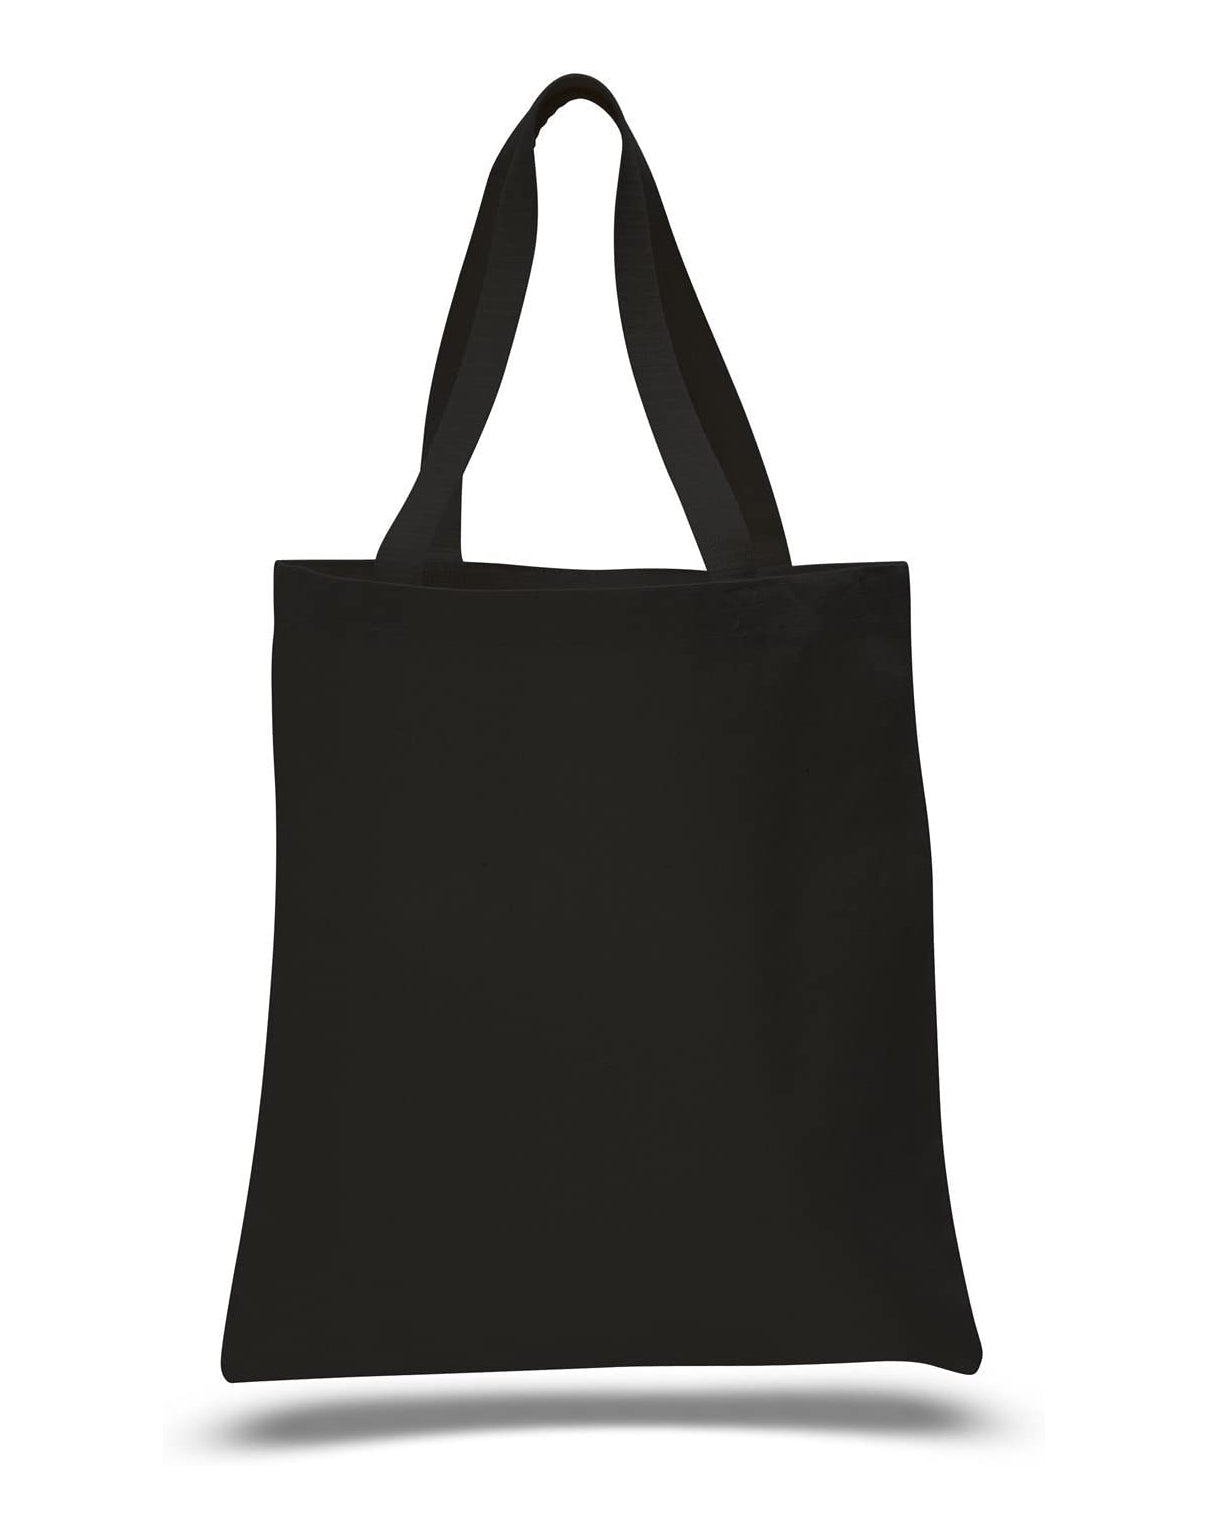 Heavy Canvas Tote Bags, 15" x 16" x 3"